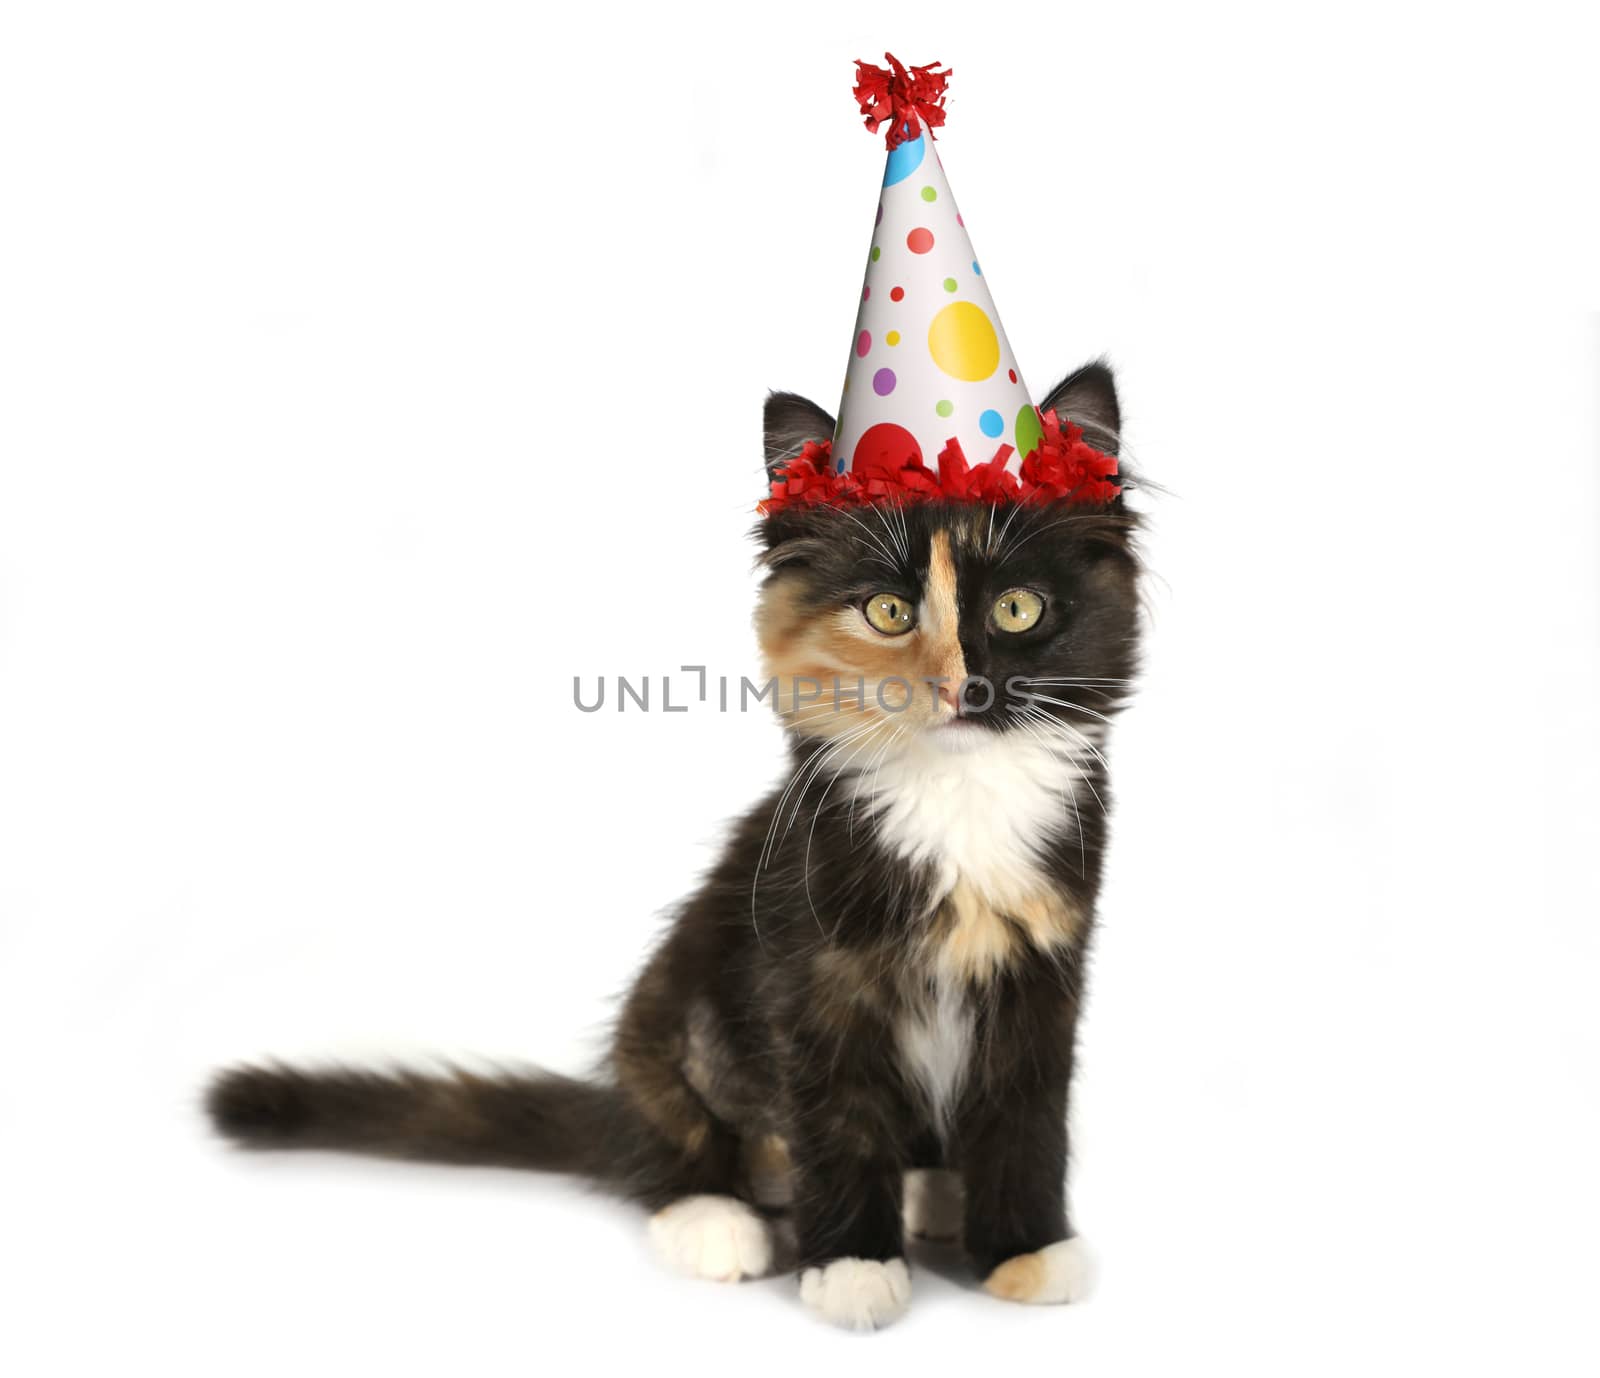 Adorable Kitten on a White Background With Birthday Hat by tobkatrina